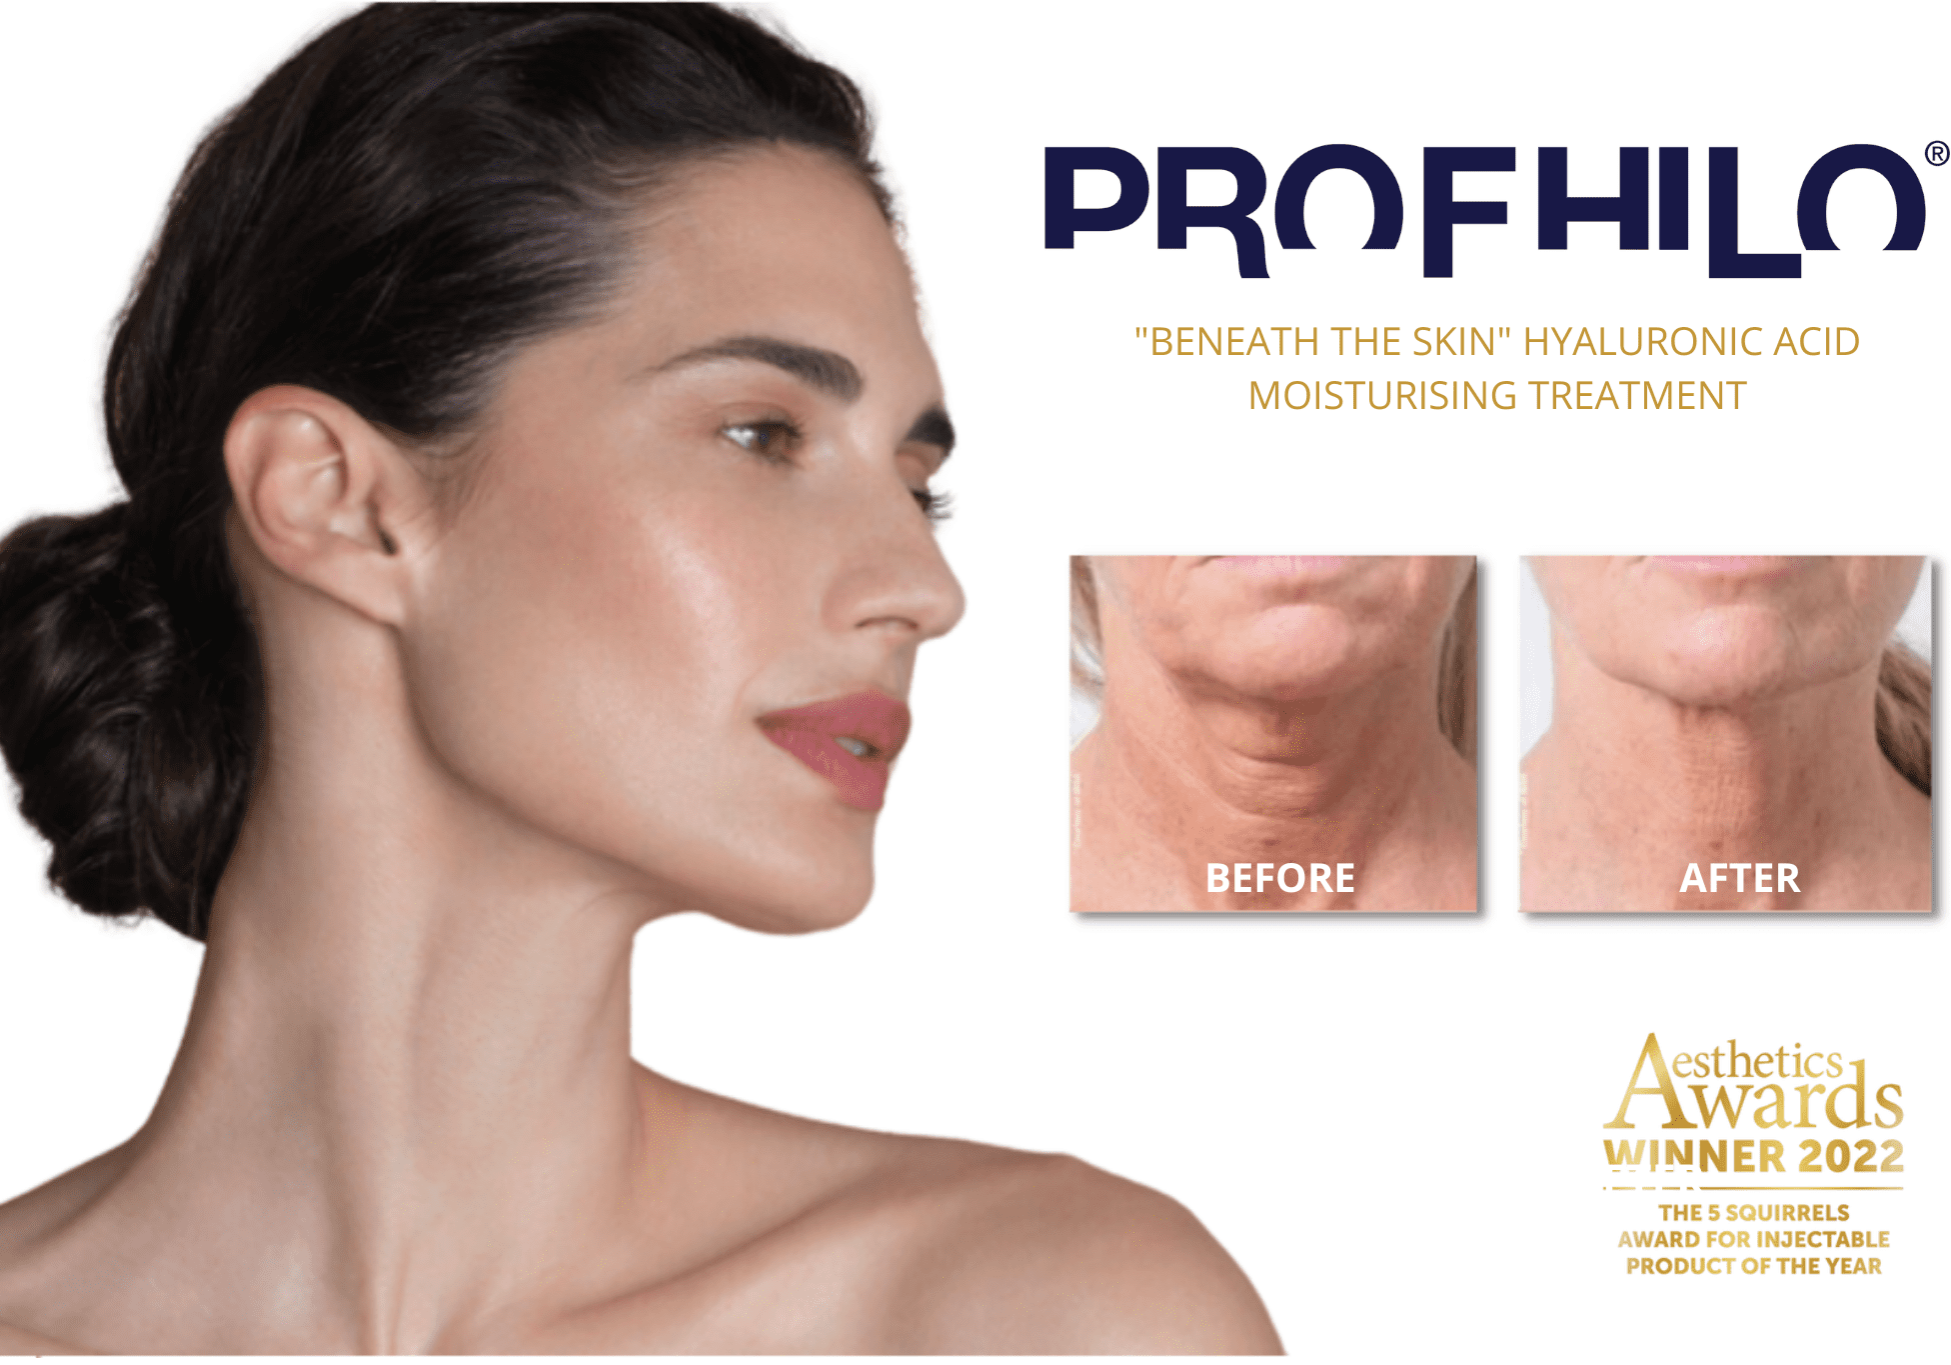 Profhilo Hyaluronic Acid Moisturising Treatment before and after